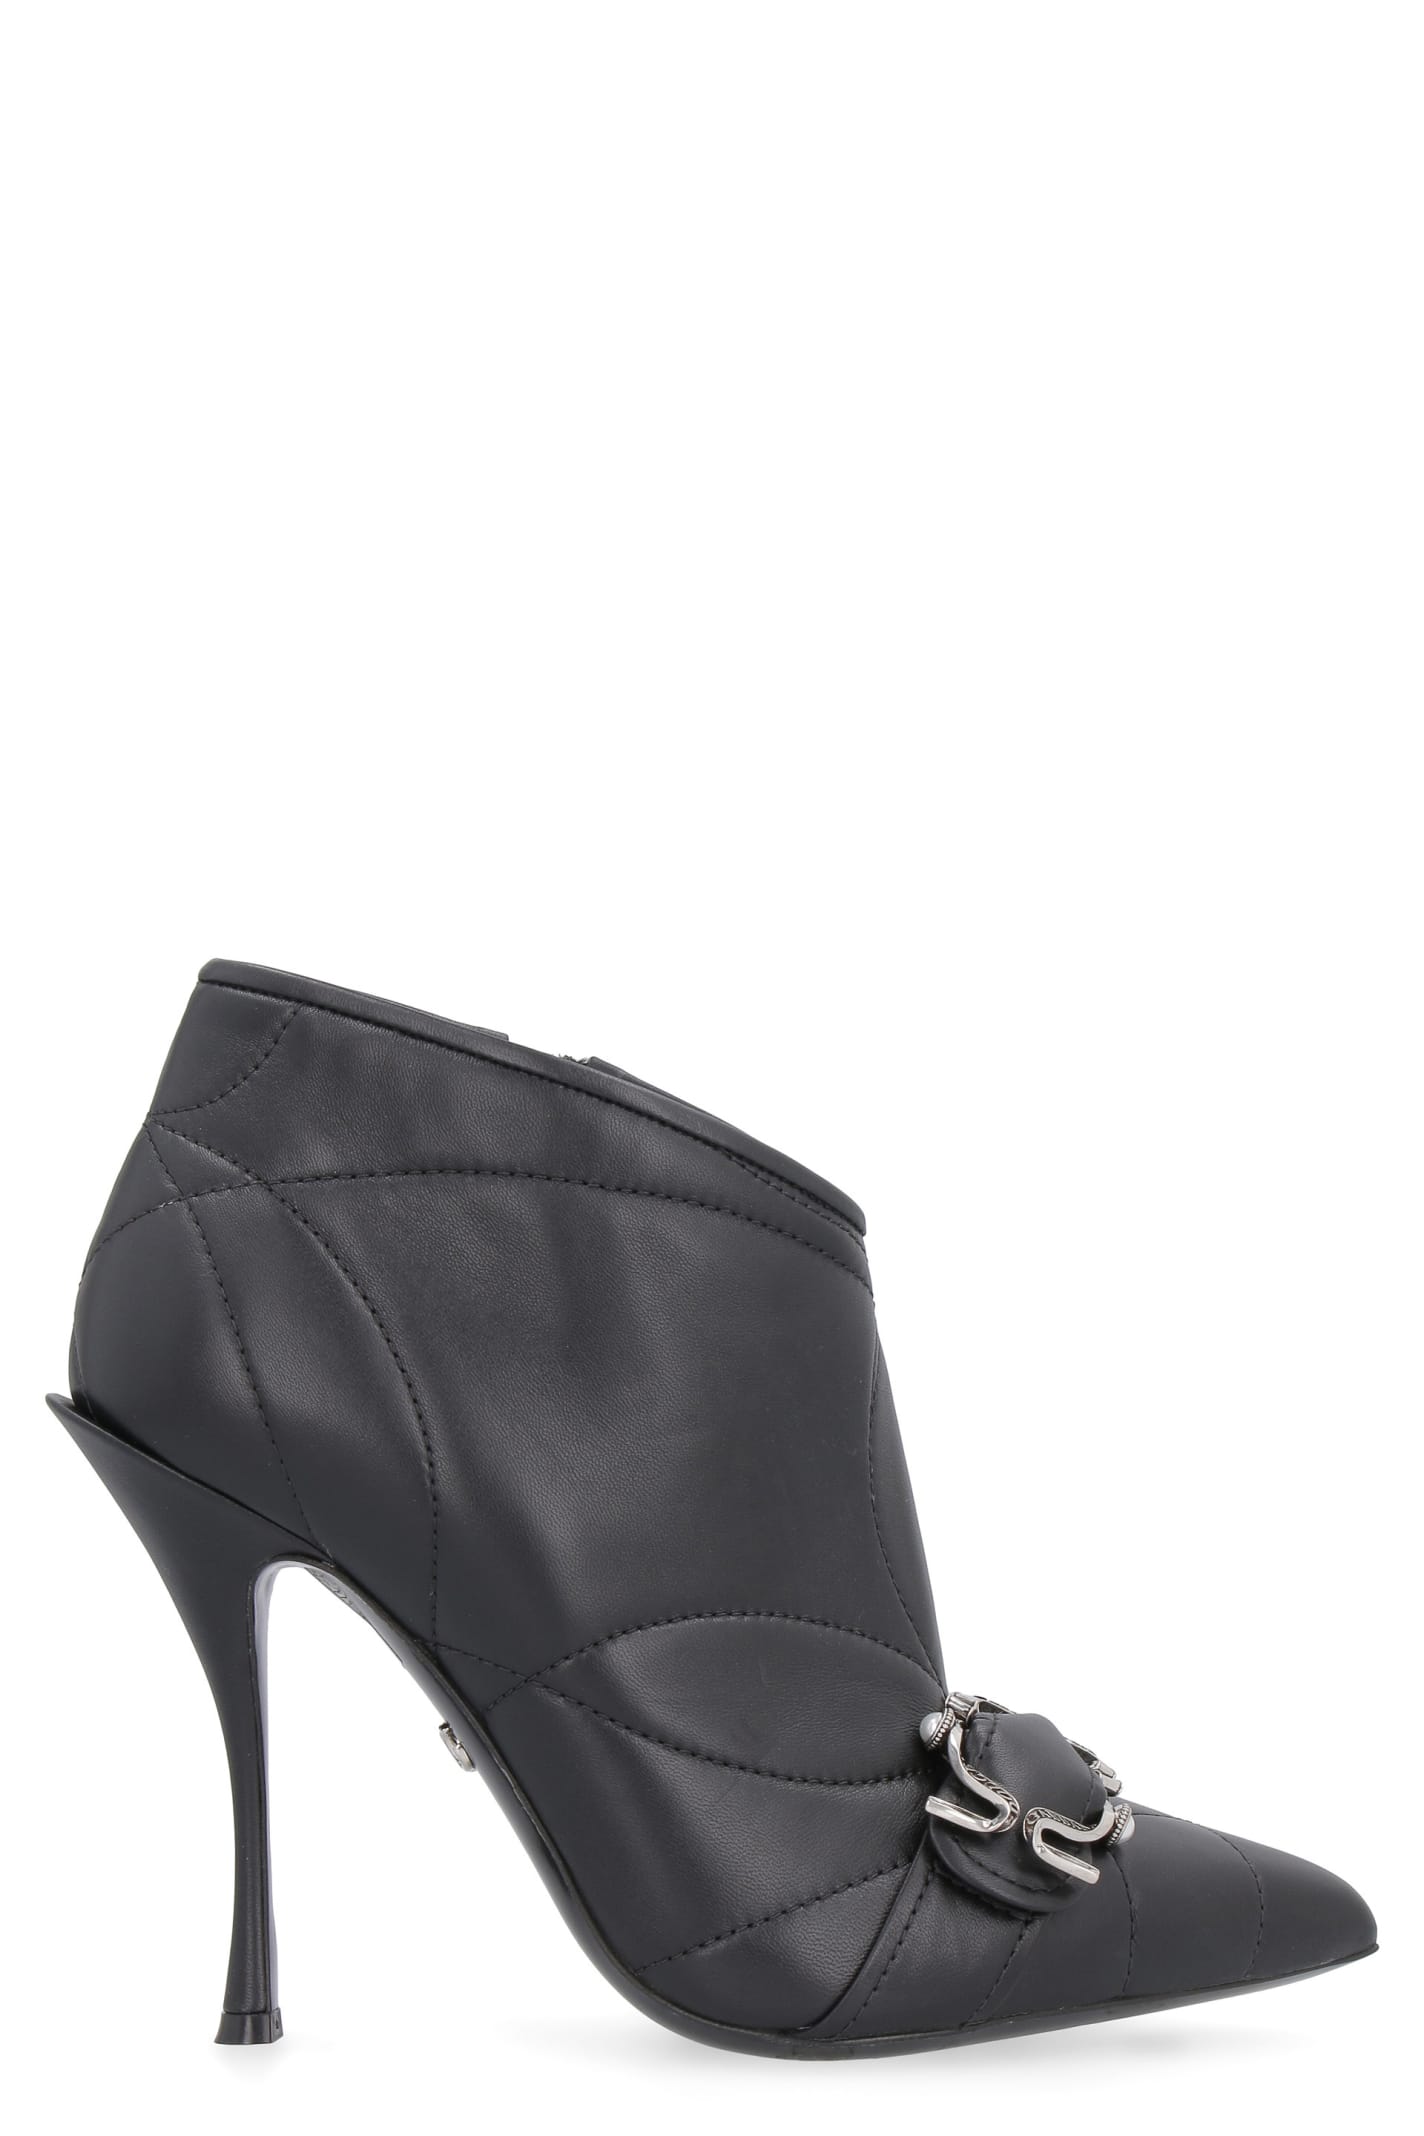 Dolce & Gabbana Leather Pointy-toe Ankle-boots